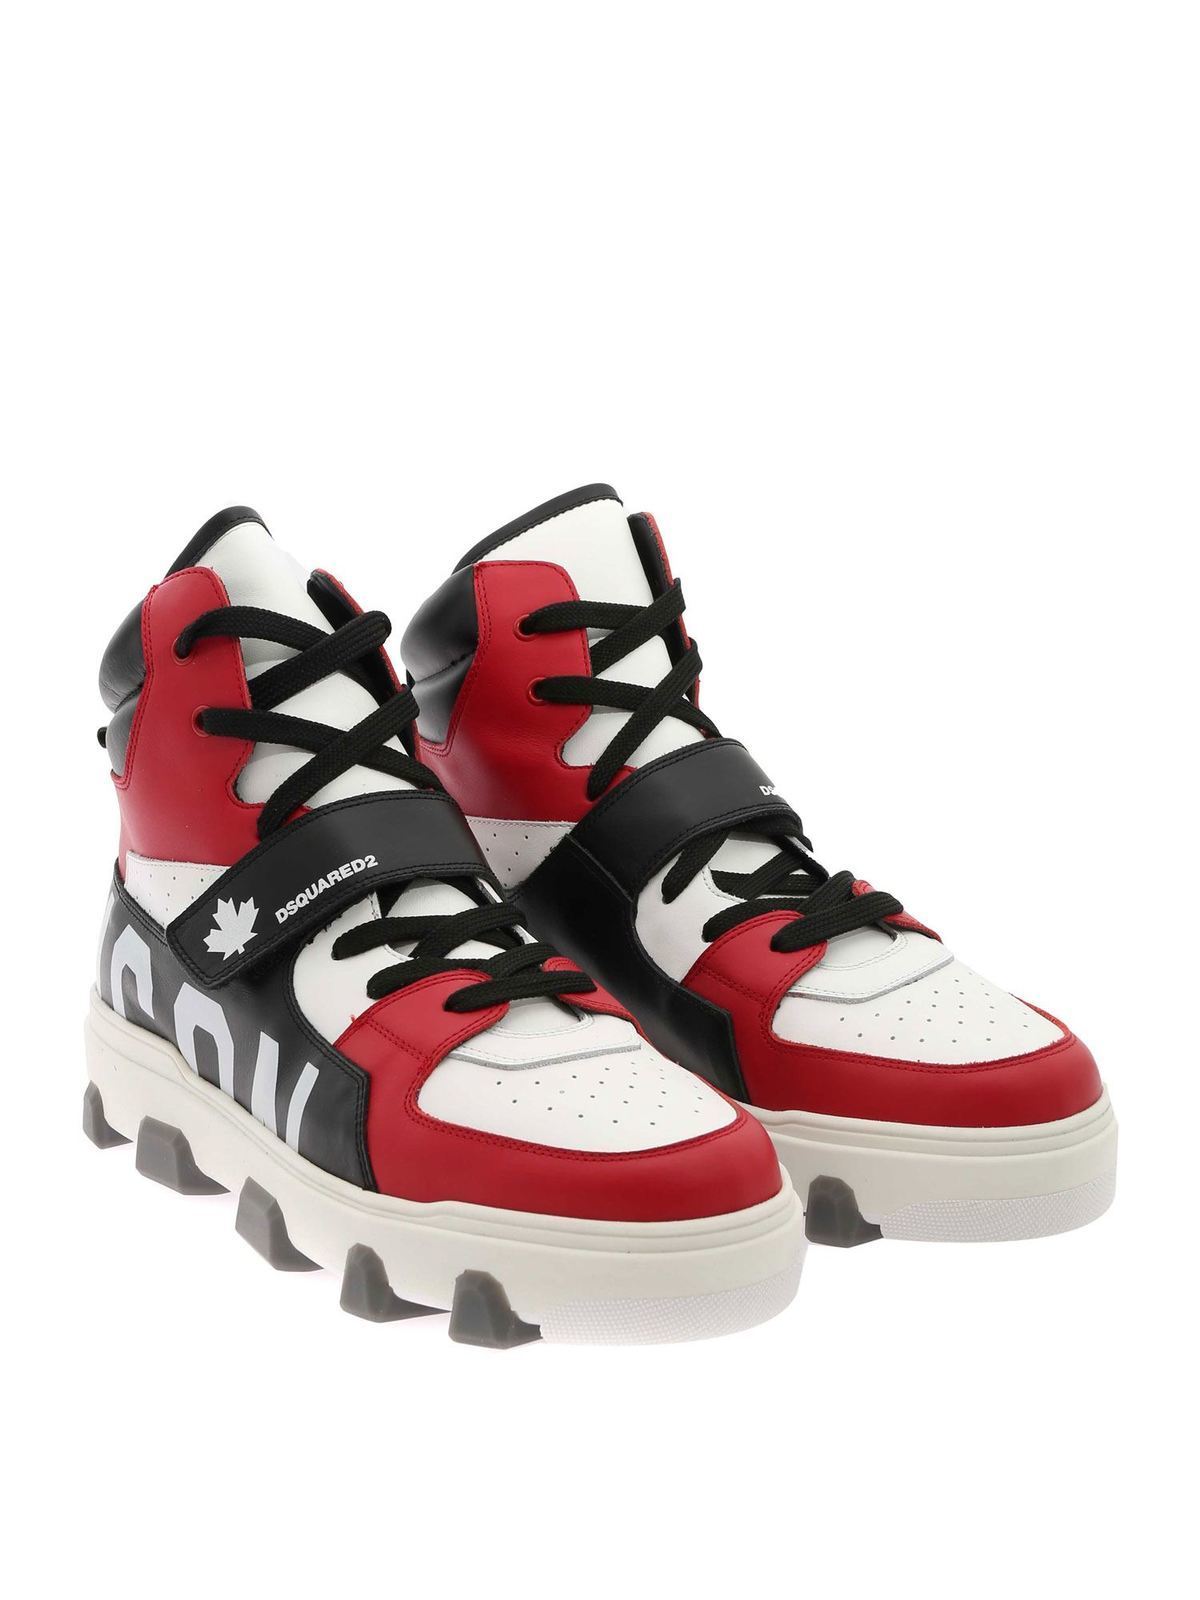 Trainers Dsquared2 - Icon basket sneakers in red, black and white 